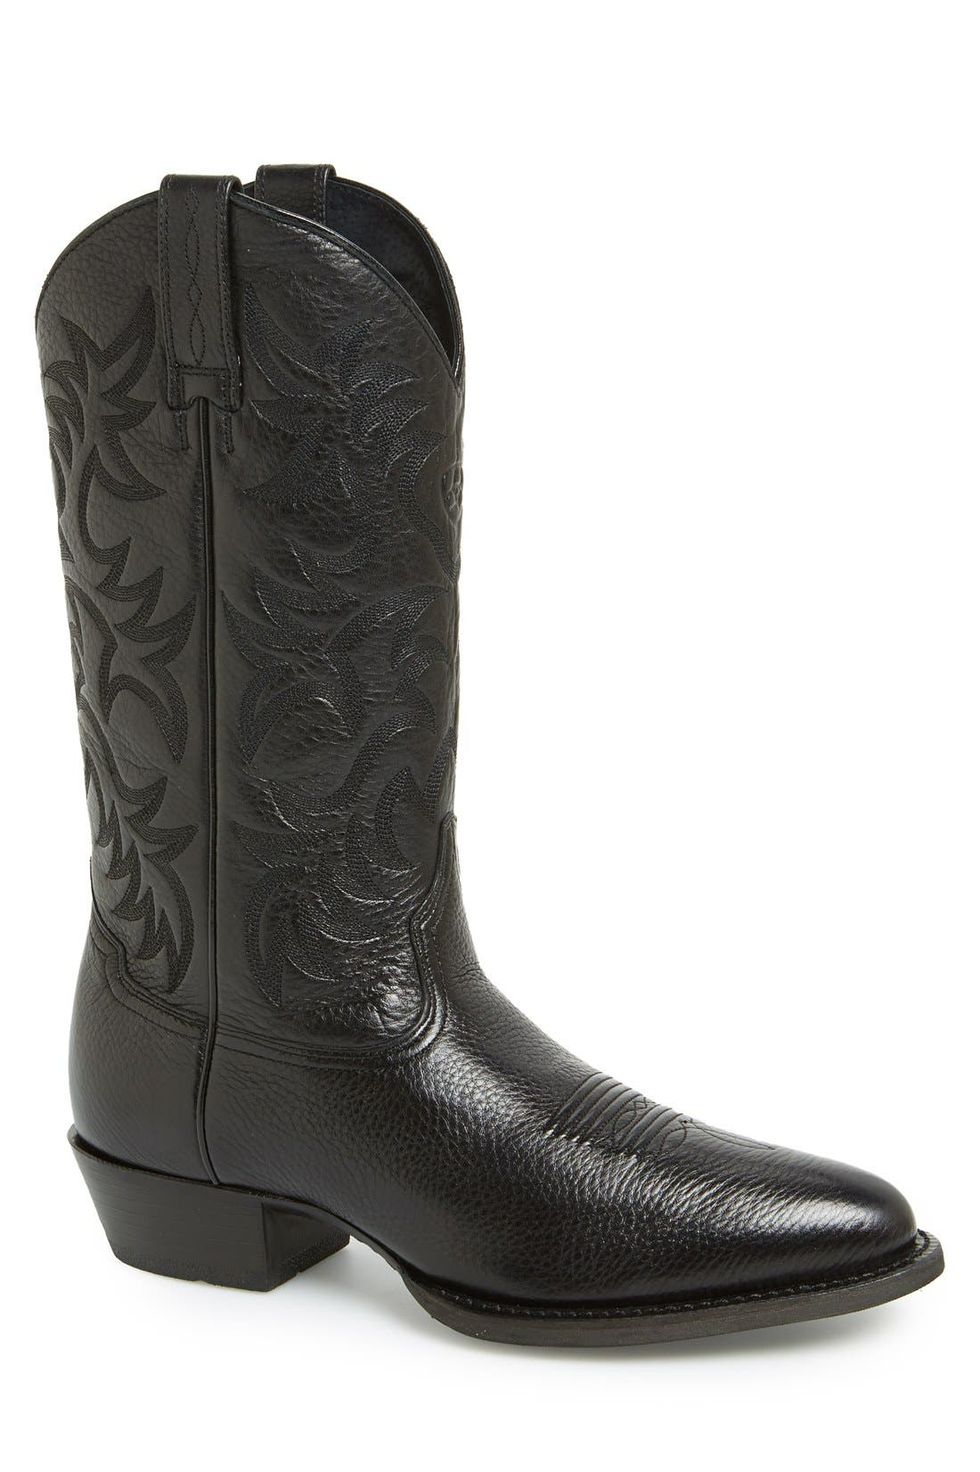 Ariat Leather Cowboy Boots